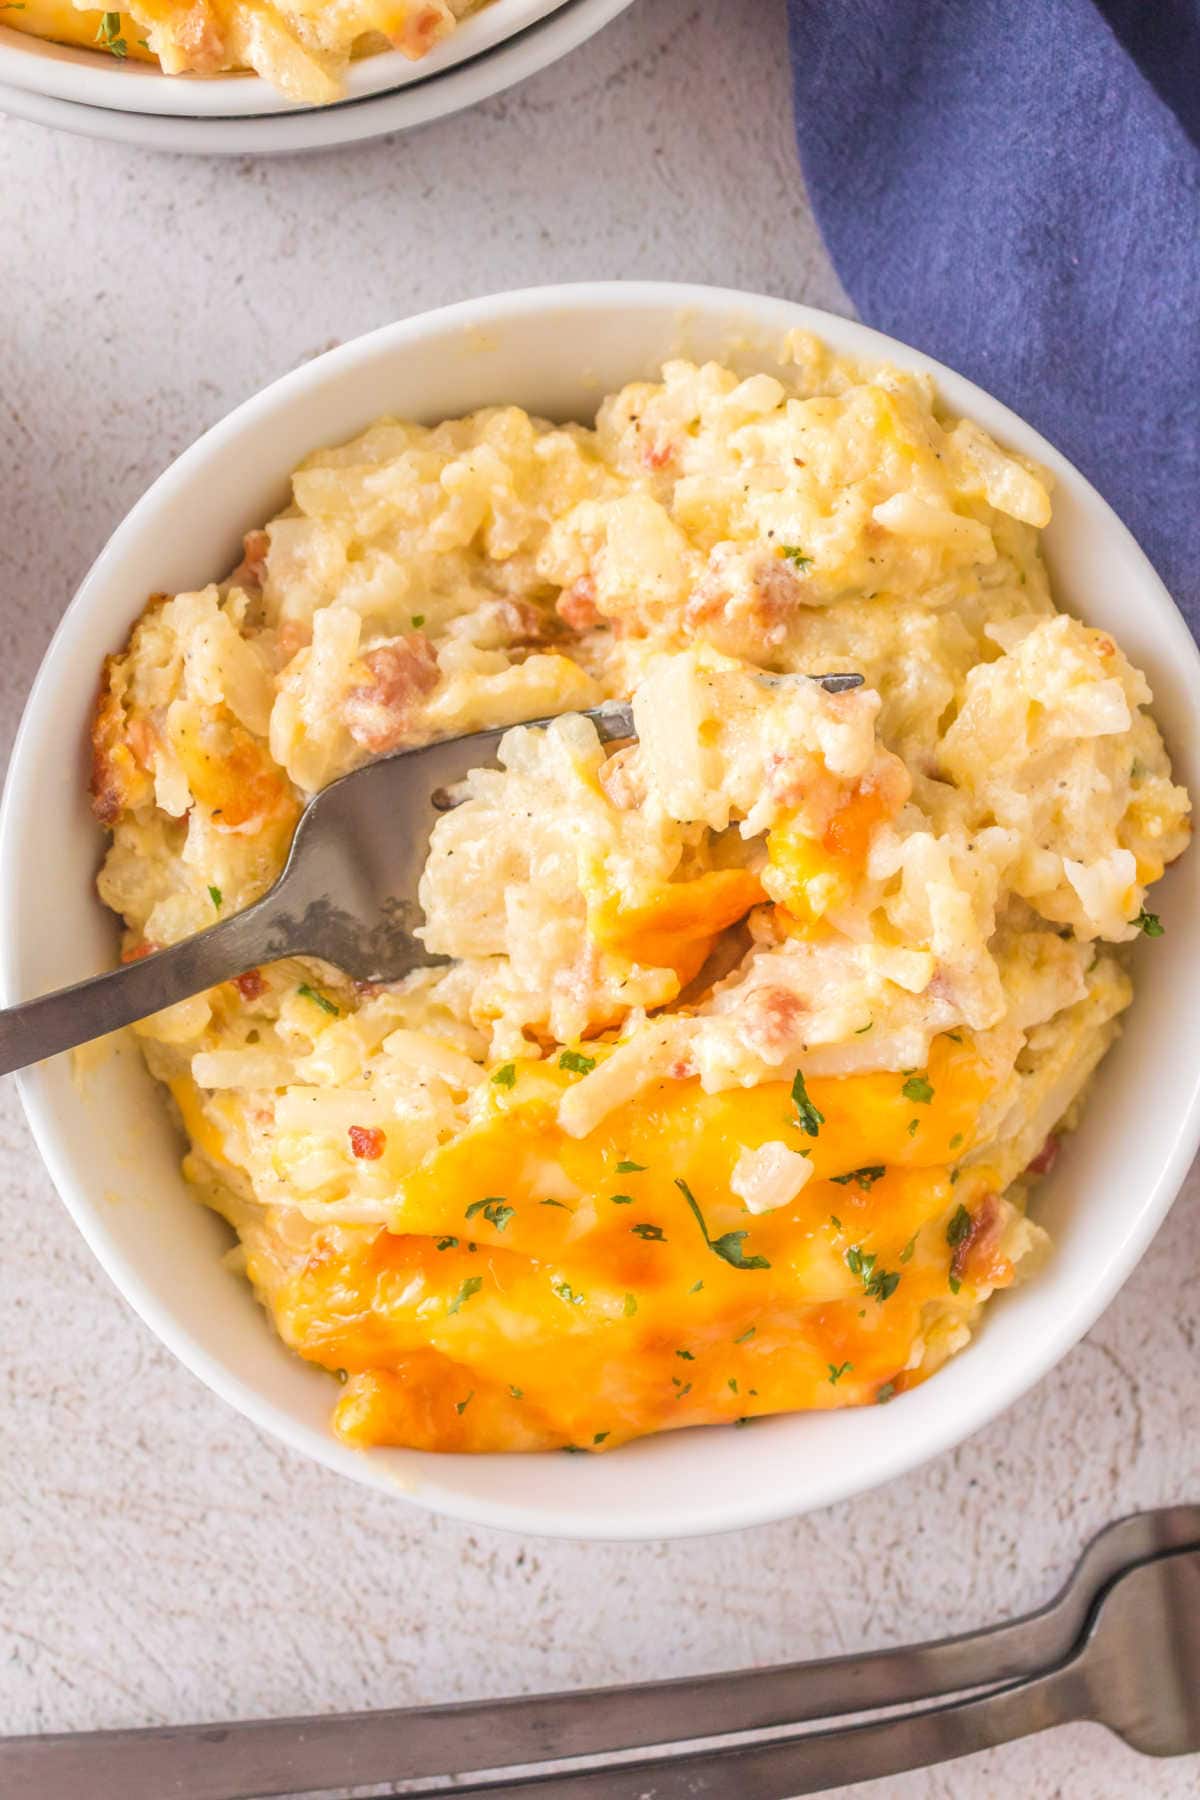 A bowl of hashbrown casserole ready to eat.